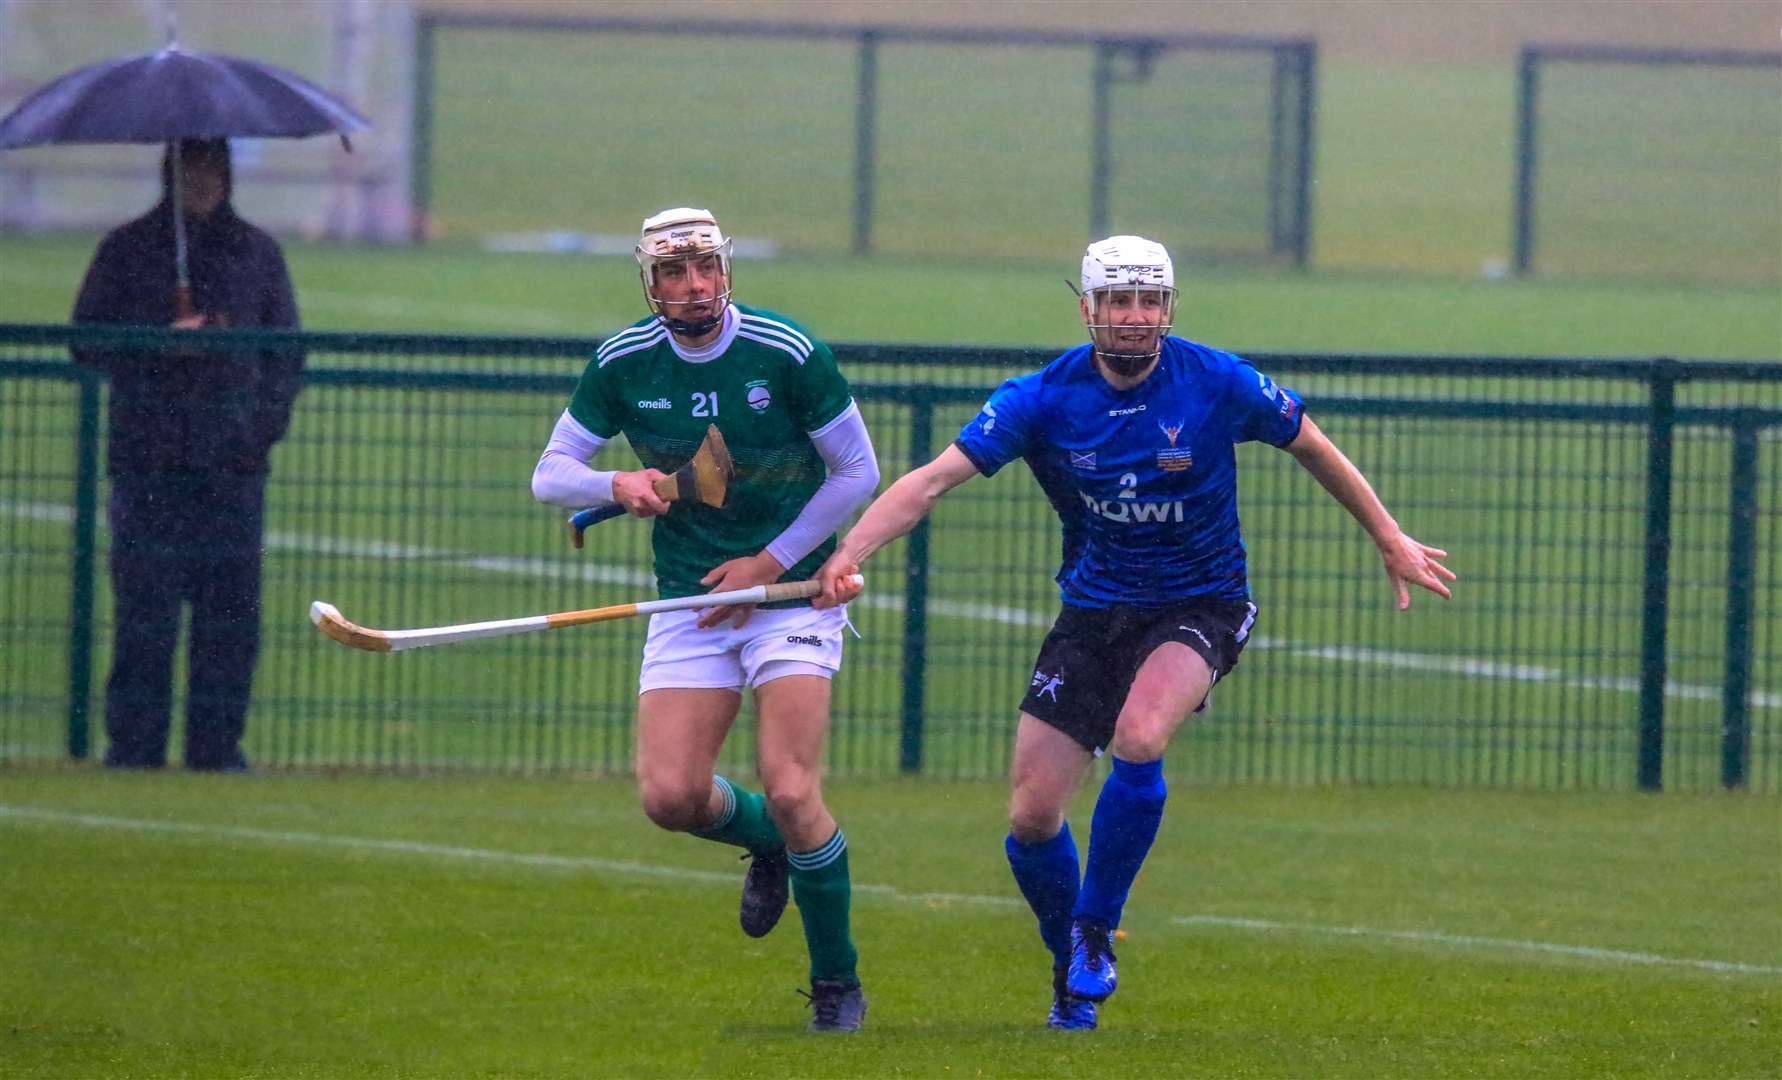 Newtonmore Camanachd's Rory Kennedy playing in a previous senior international shinty/hurling clash.